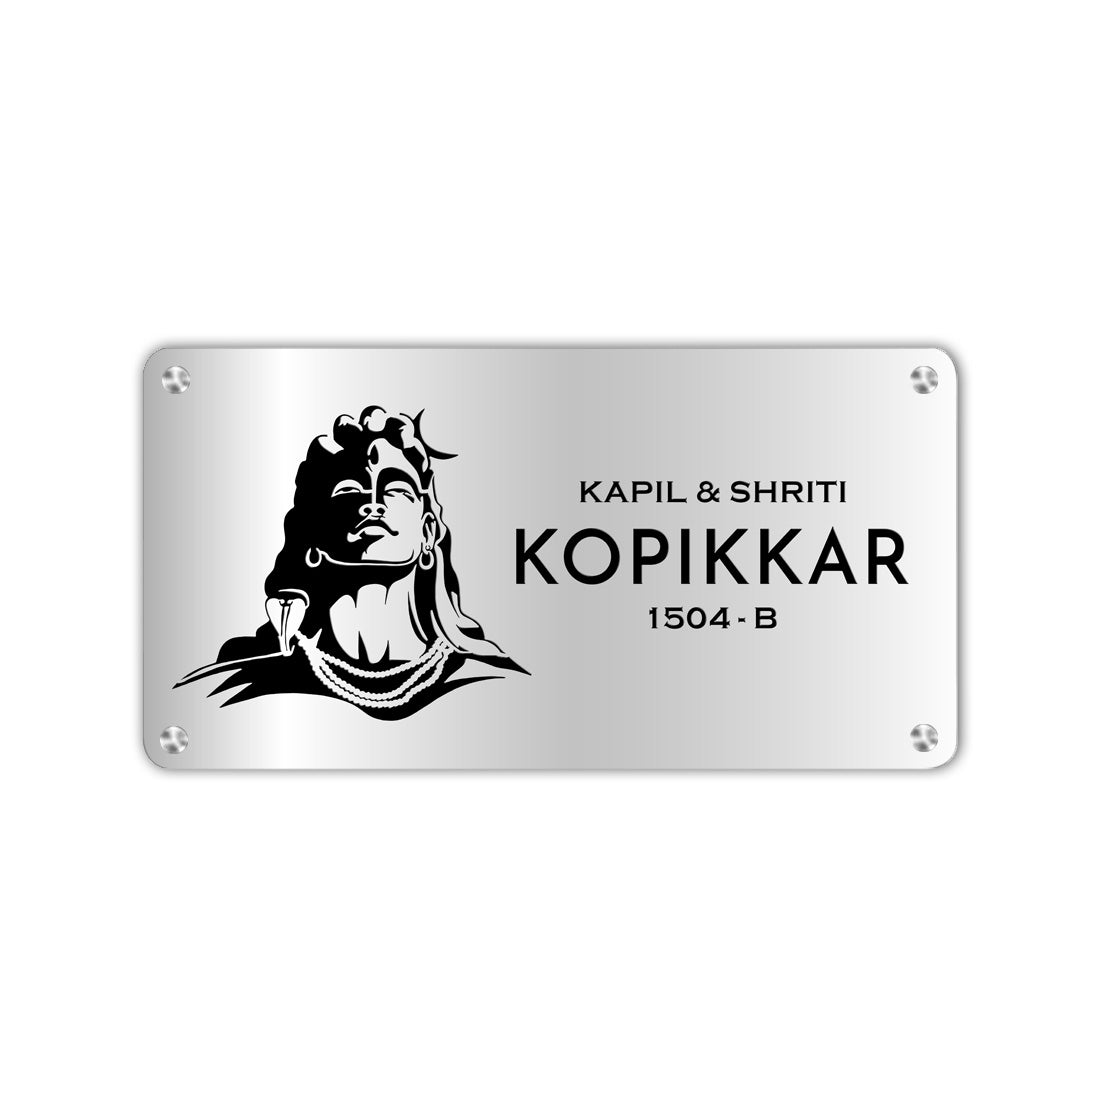 Personalized Name Plate Design with Lord Shiva-God Nameplate For Home